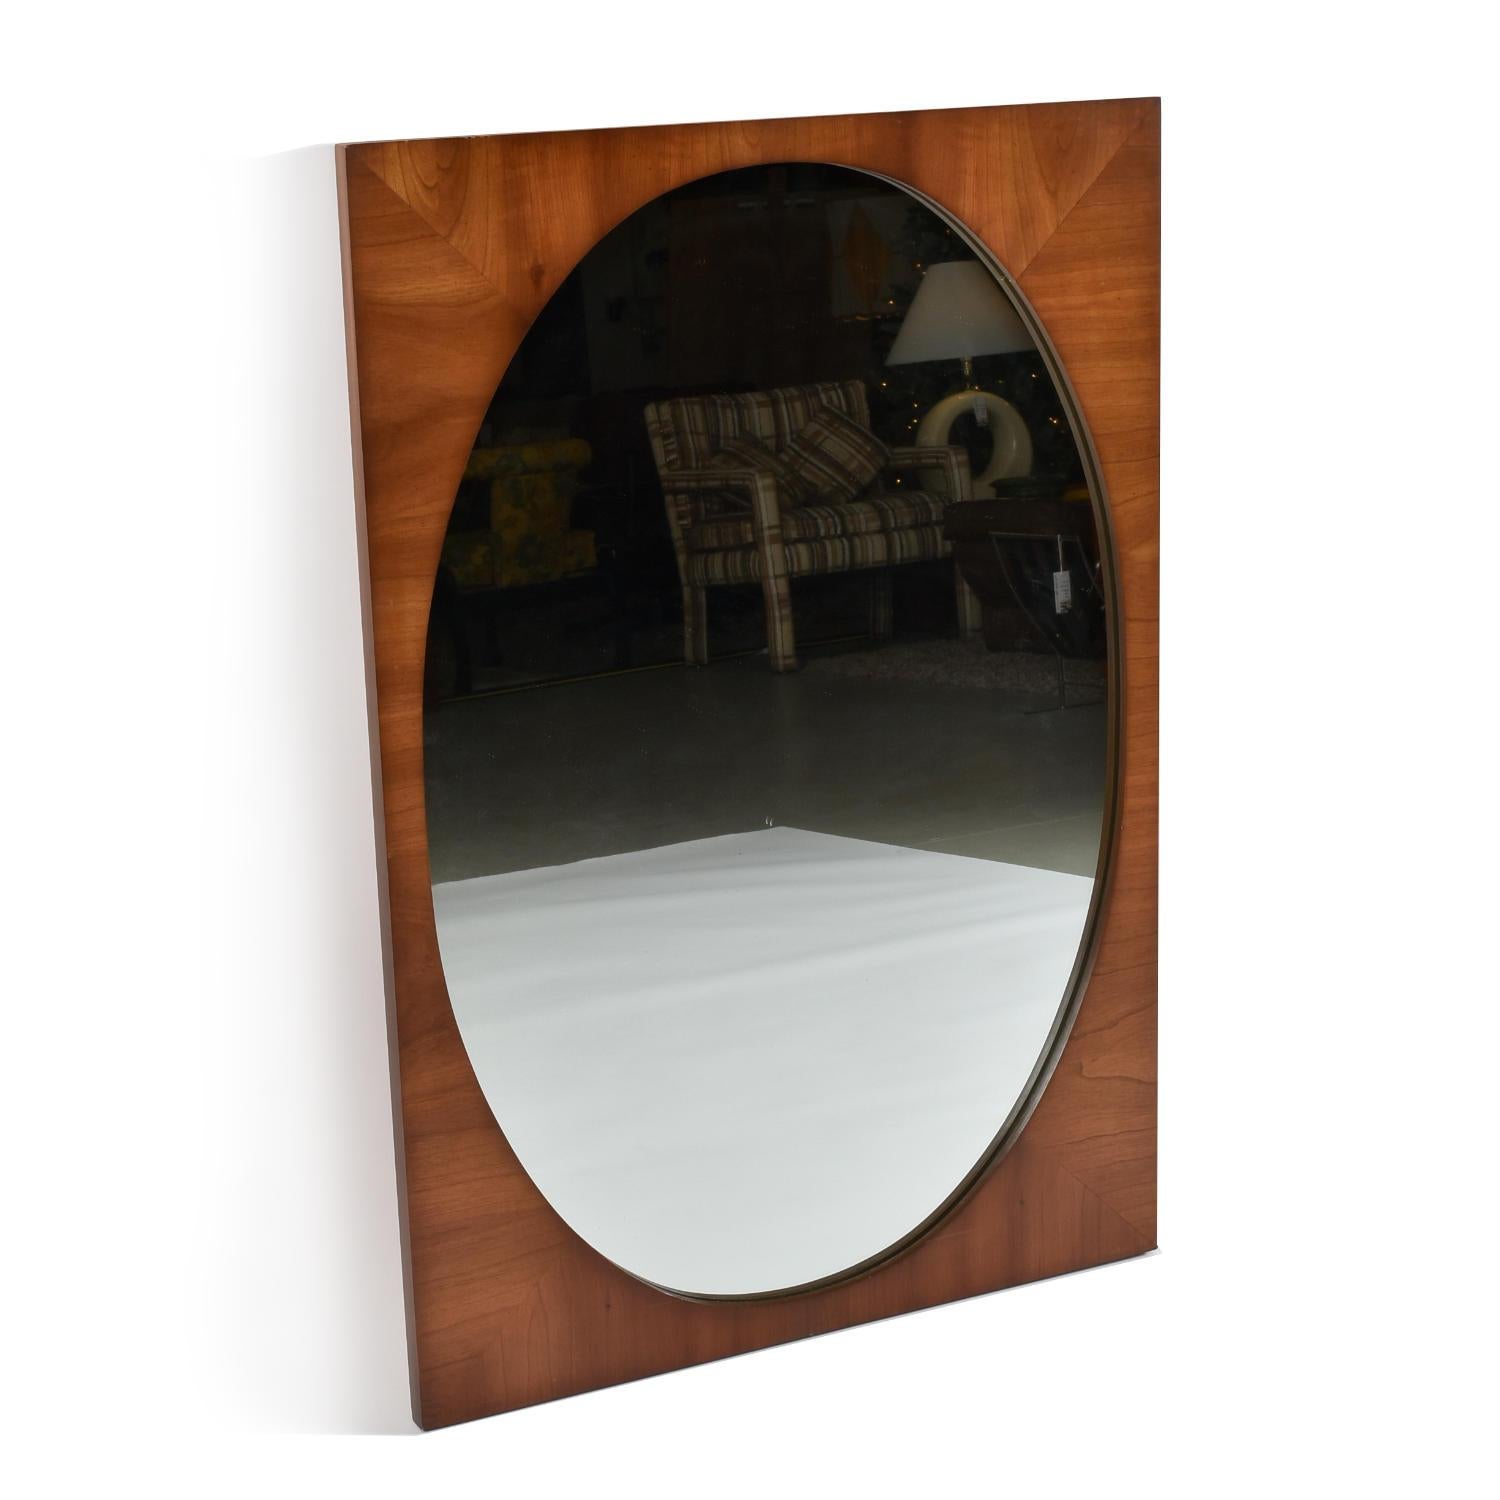 Handsome Mid-Century Modern walnut wall mirror by Dixie. The exceptional mirror has book matched walnut veneer, evidenced in each of the four corners. The vertically oriented piece is rectangular with inset, oval mirror glass. A new French cleat is